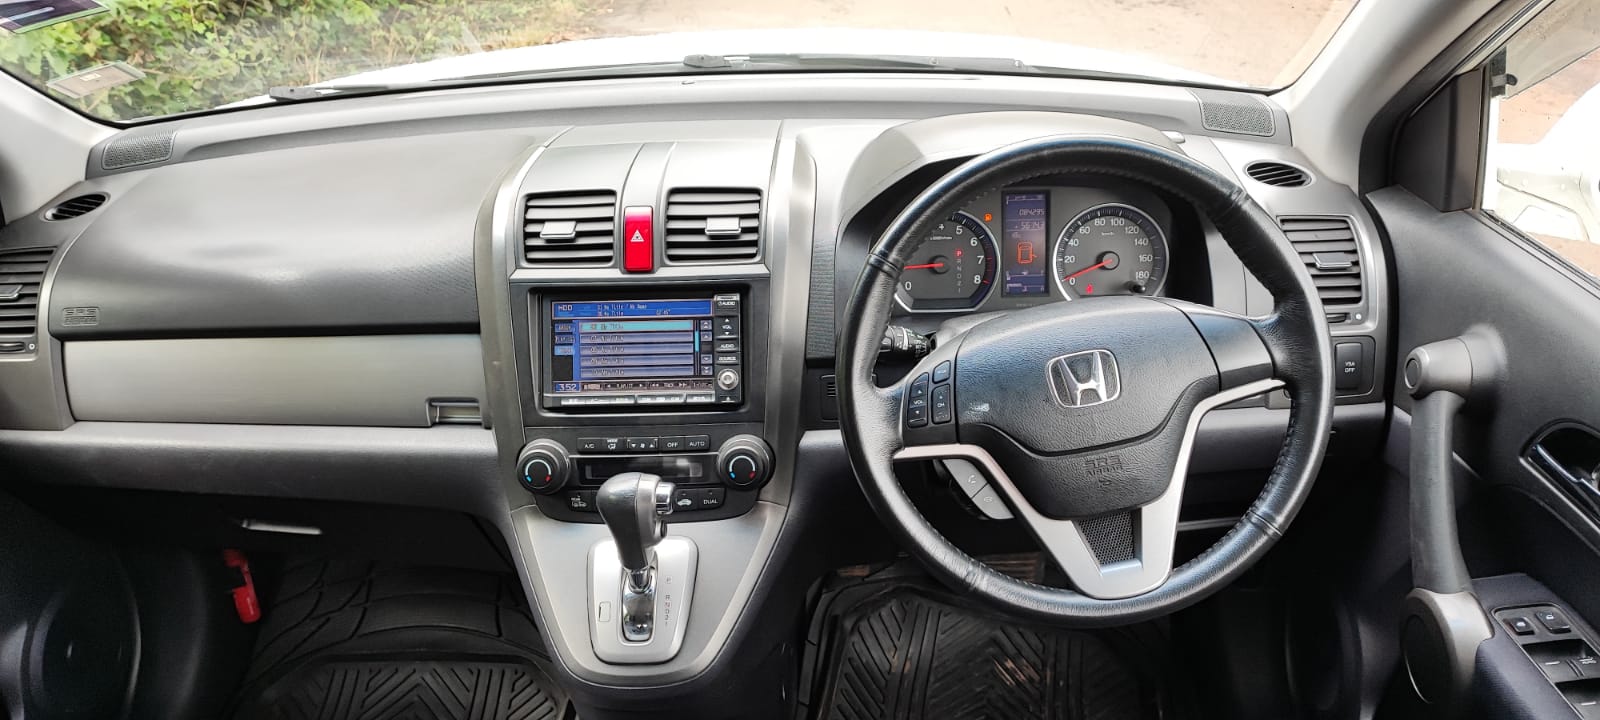 Honda CR-V 2011 Clean You Pay 20% Deposit Trade in OK as NEW